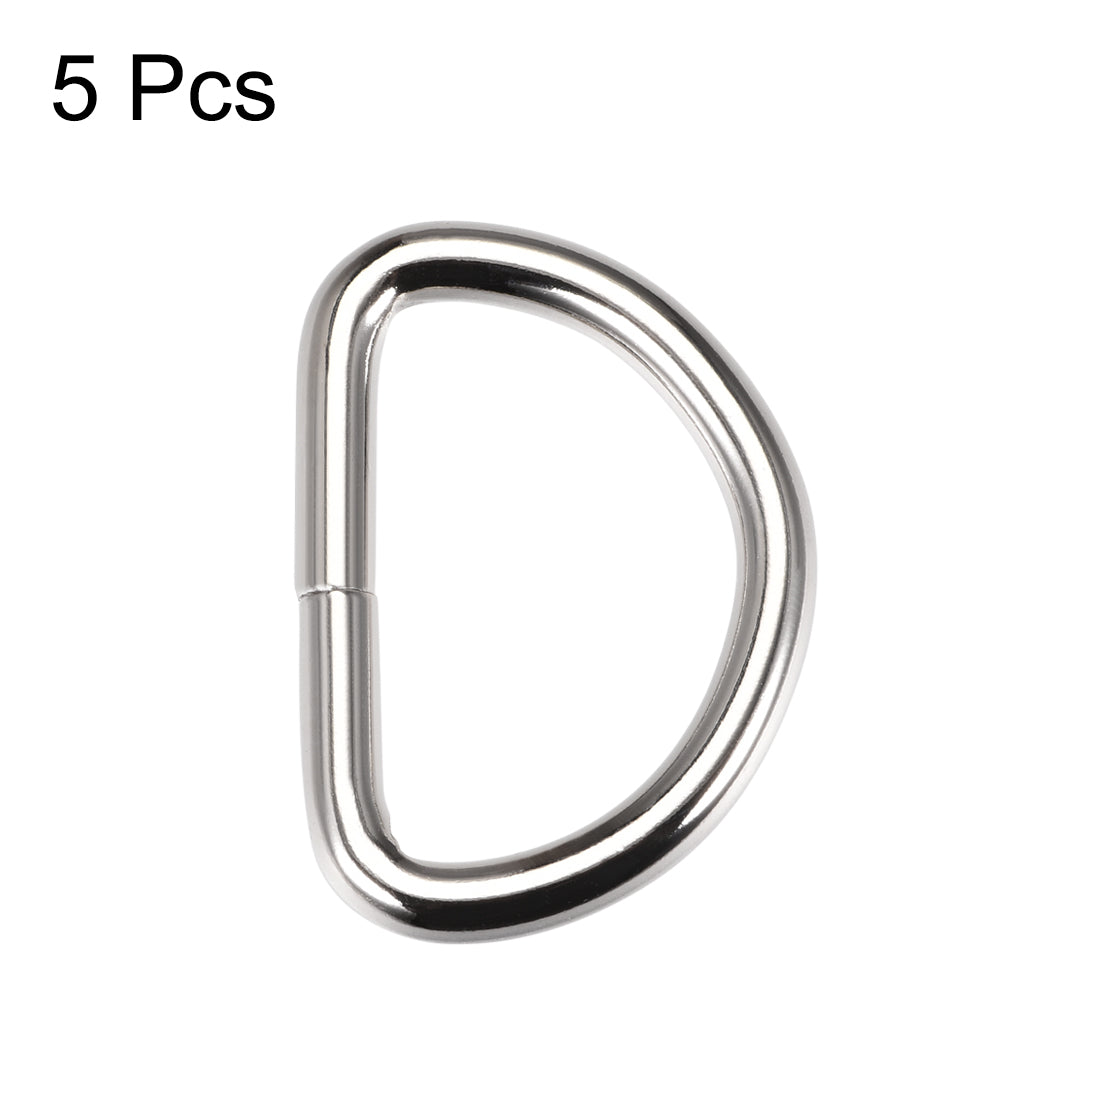 uxcell Uxcell 5 Pcs D Ring Buckle 1.26 Inch Metal Semi-Circular D-Rings Silver Tone for Hardware Bags Belts Craft DIY Accessories